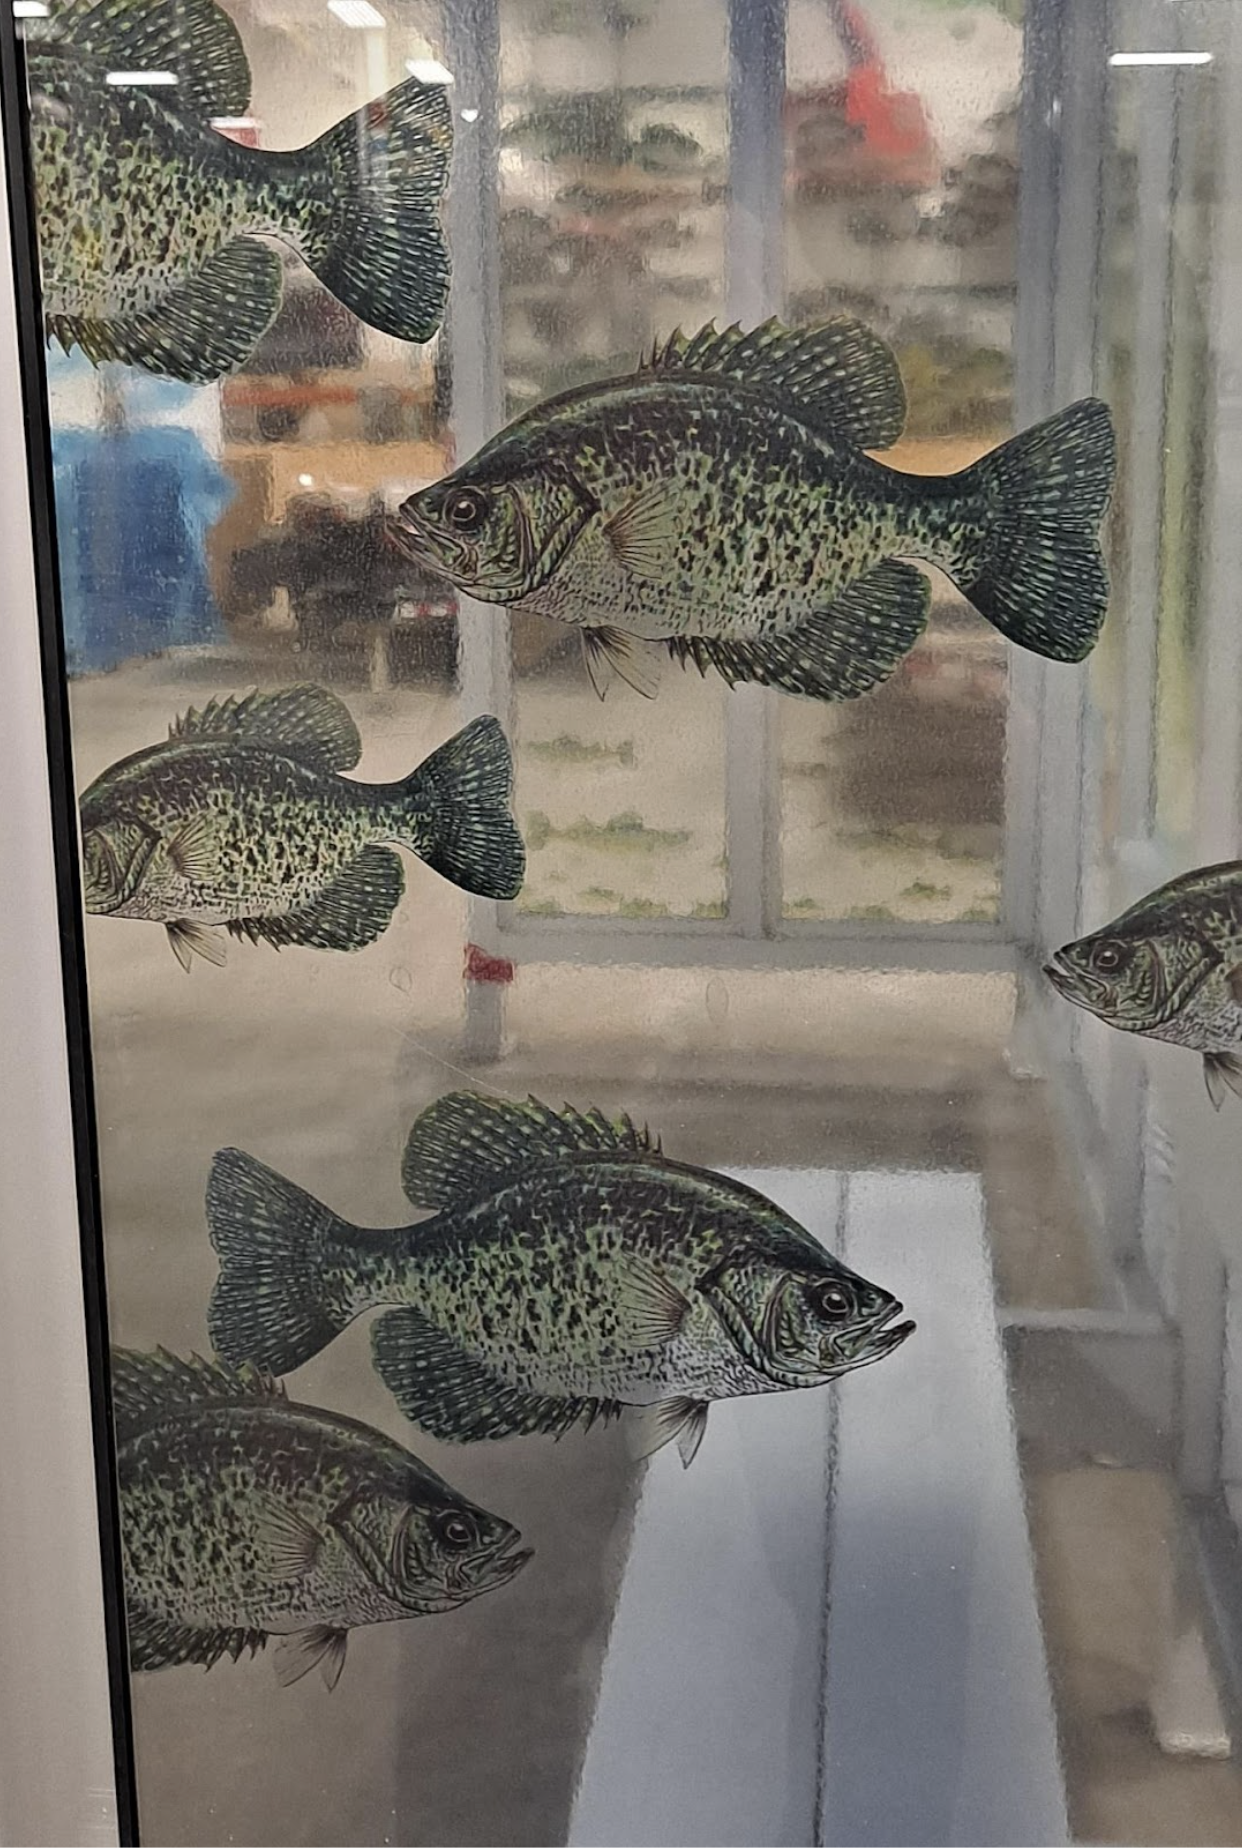 A group of fish in a tank, art for bus stop.